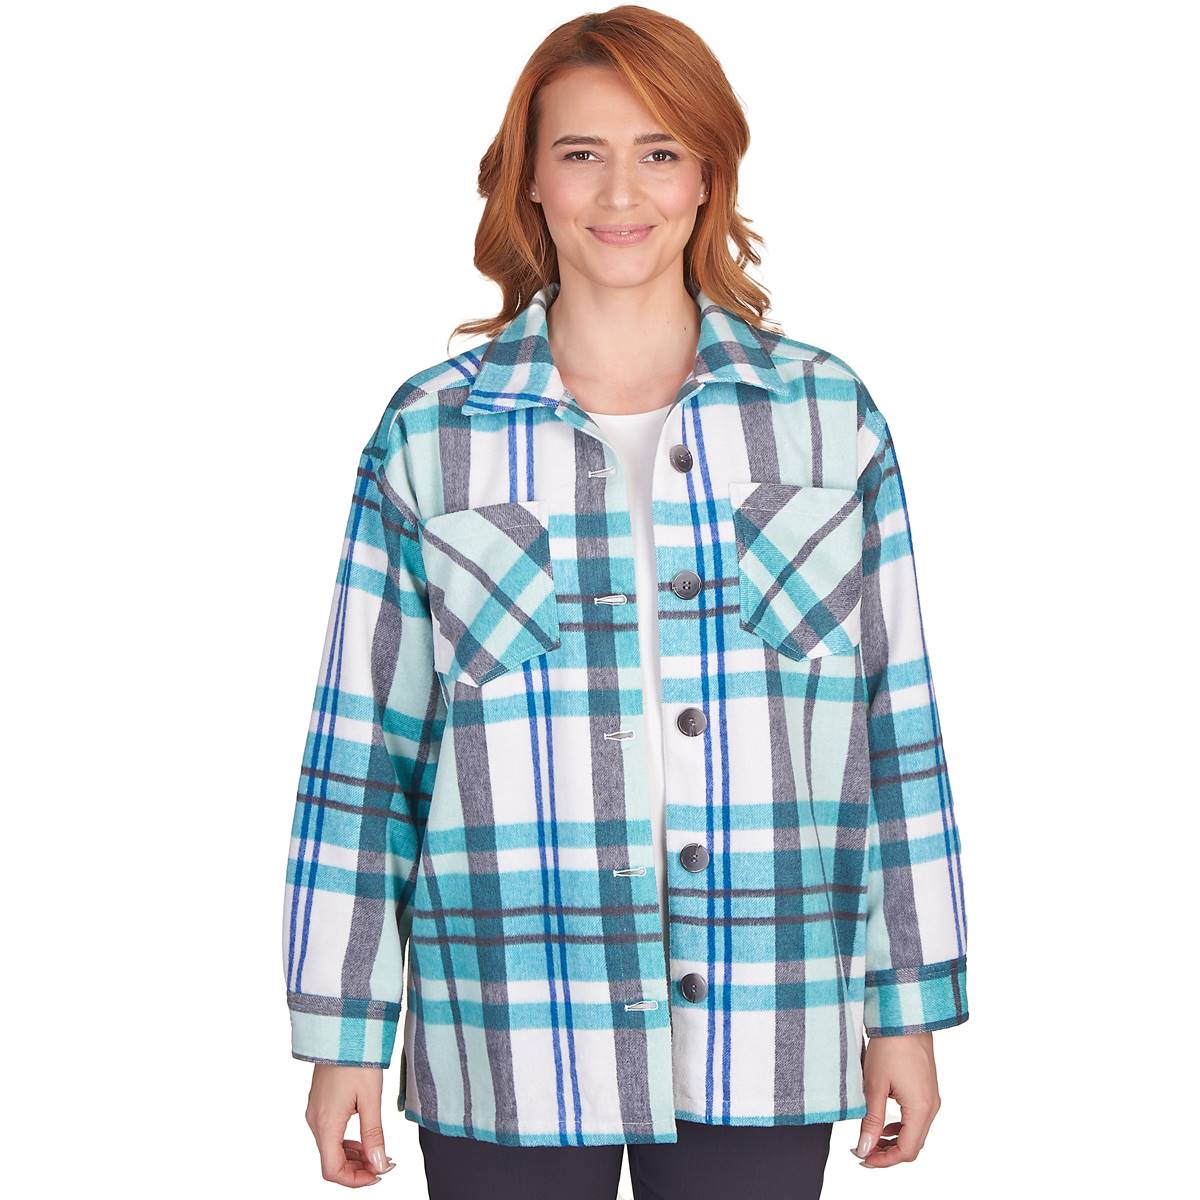 Petite Ruby Rd. Mint Condition Brushed Plaid Oversized Jacket